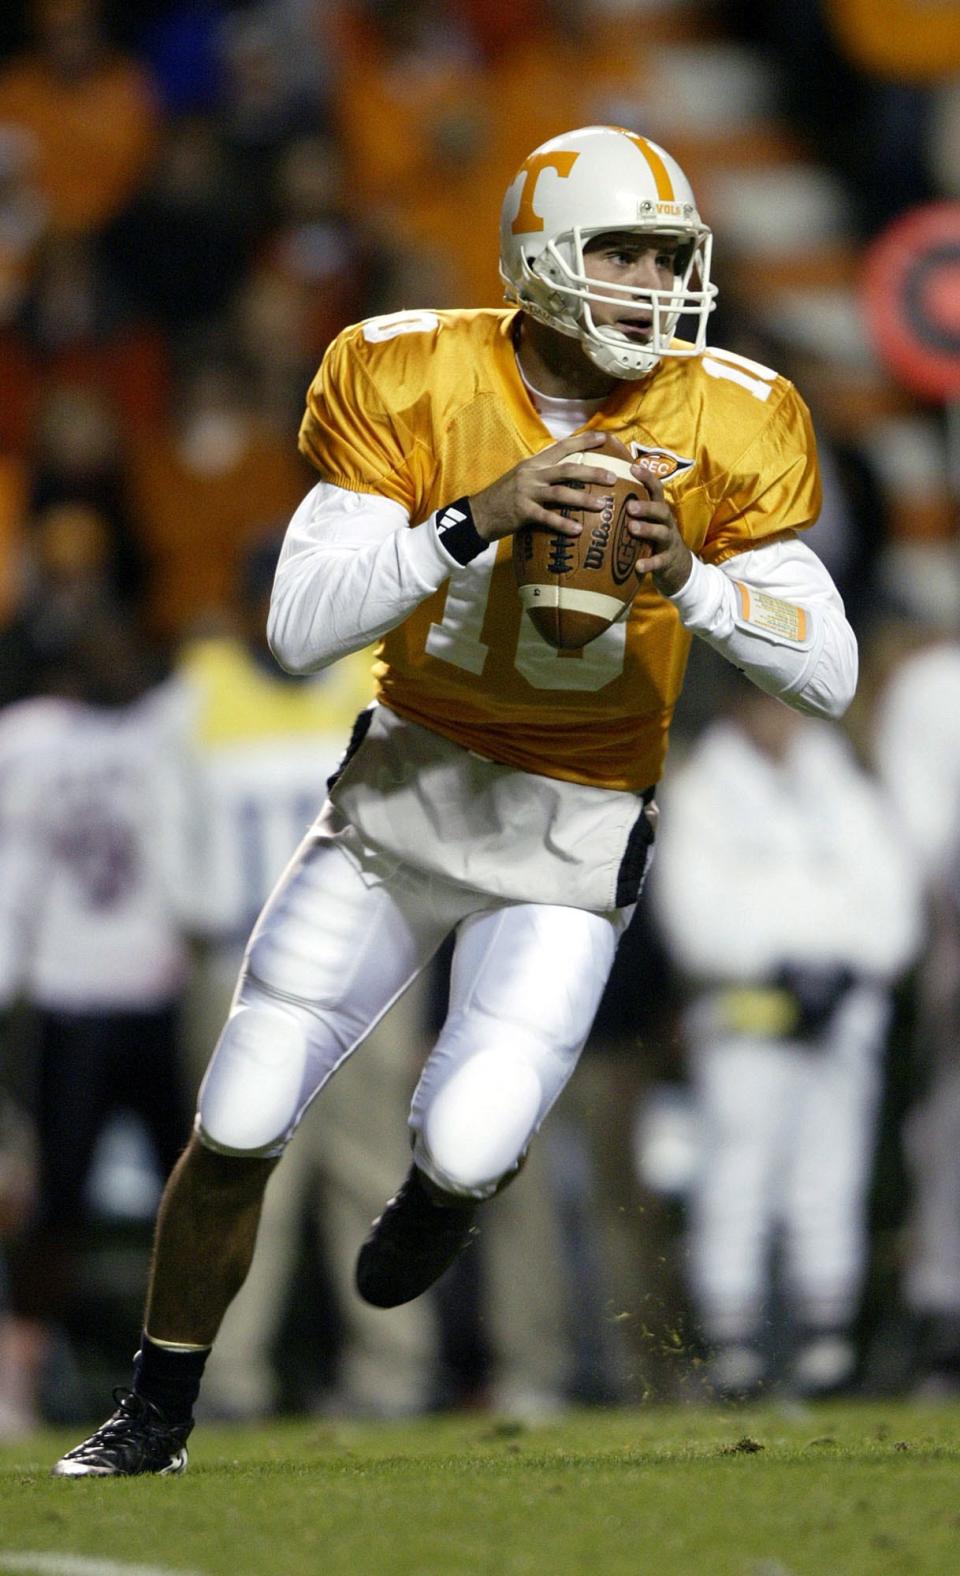 Erik Ainge was back in charge against South Carolina in October 2005, but by then the Vols had shaken things up with Randy Sanders resigning in an effort to revive the offense.